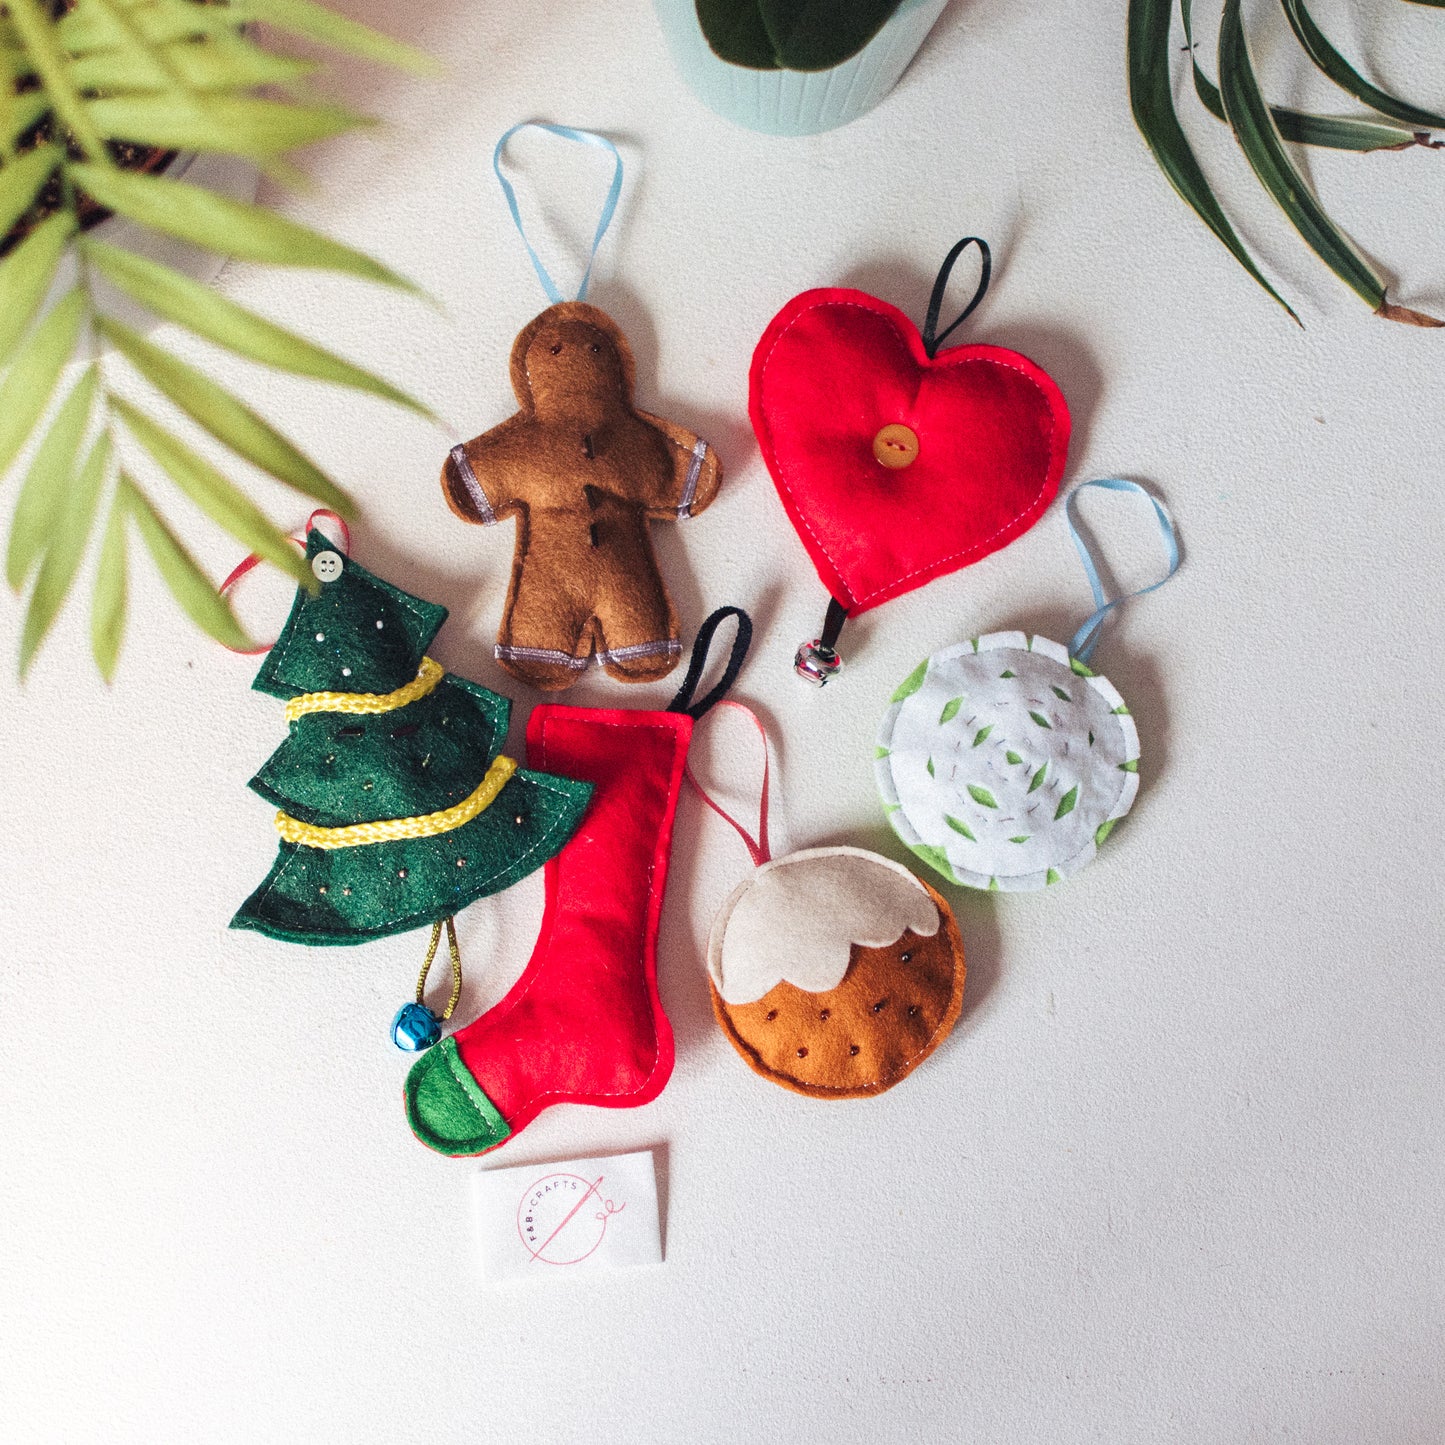 Handmade Christmas Felt Decorations Pack: A group of six or five charming felt Christmas ornaments, including gingerbread men, hearts, Christmas trees, stockings, snowmen, and baubles.